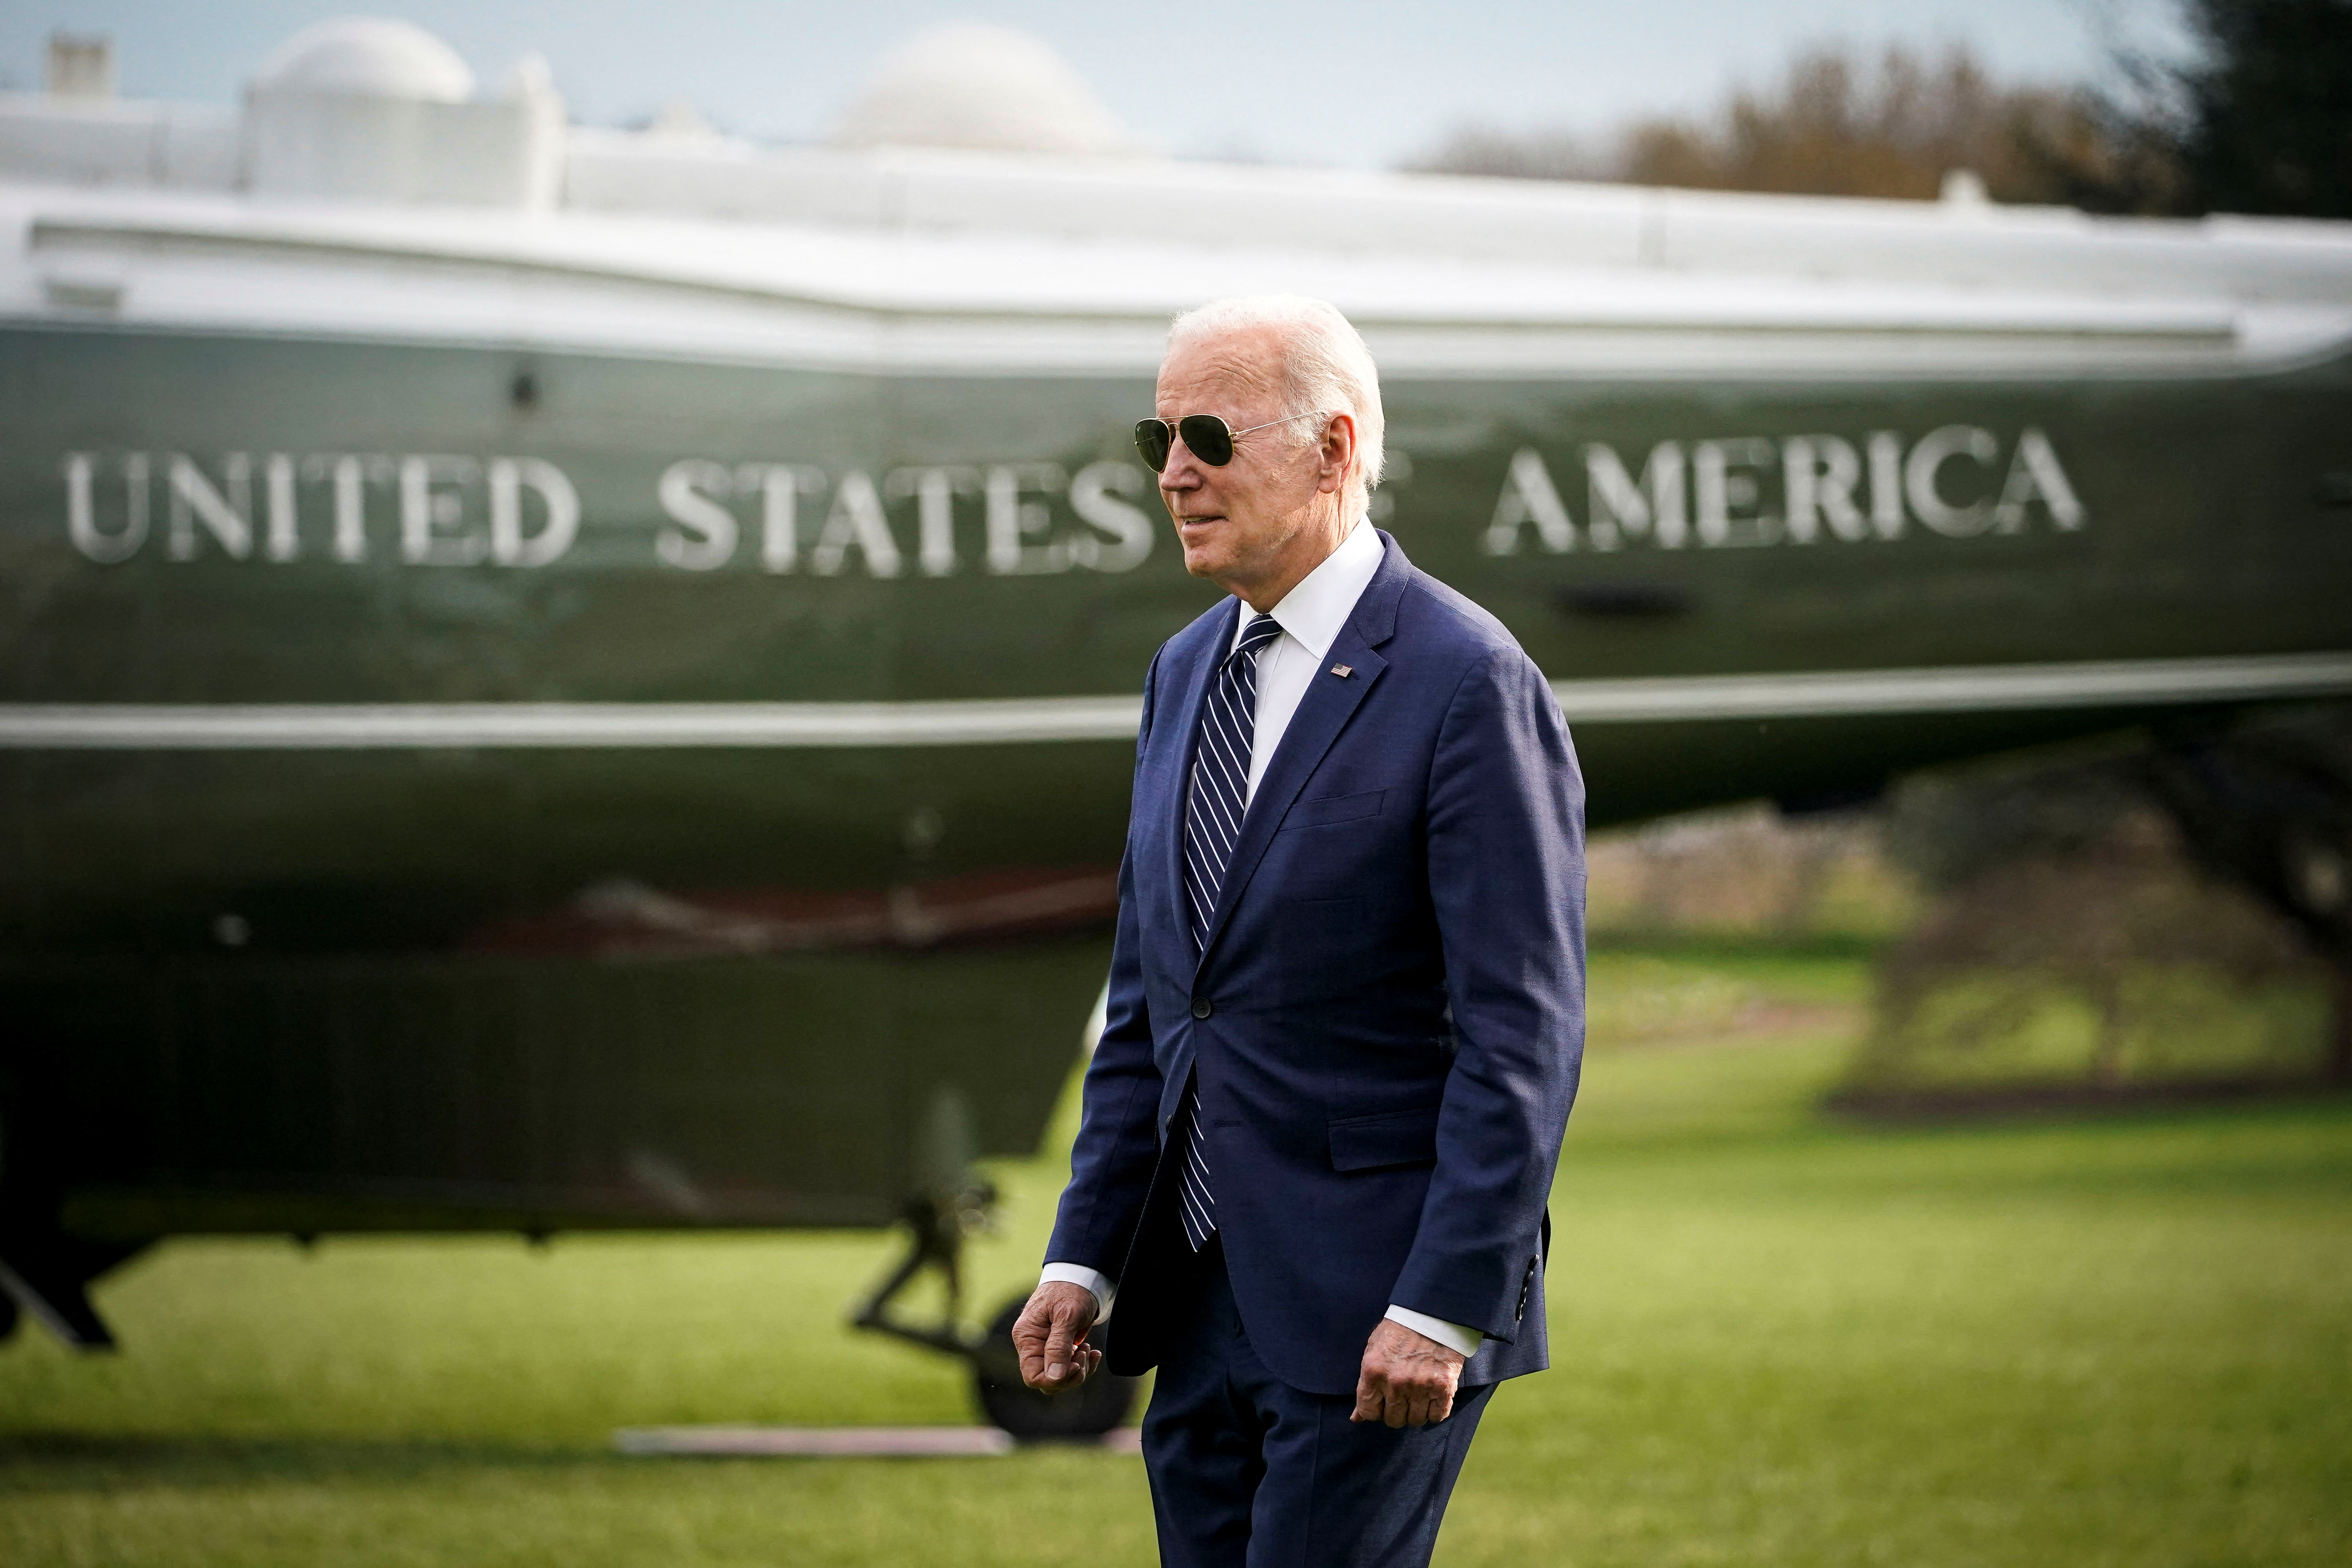 U.S. President Biden walks to board Marine One for travel to Rehoboth Beach, Delaware on the South Lawn of the White House